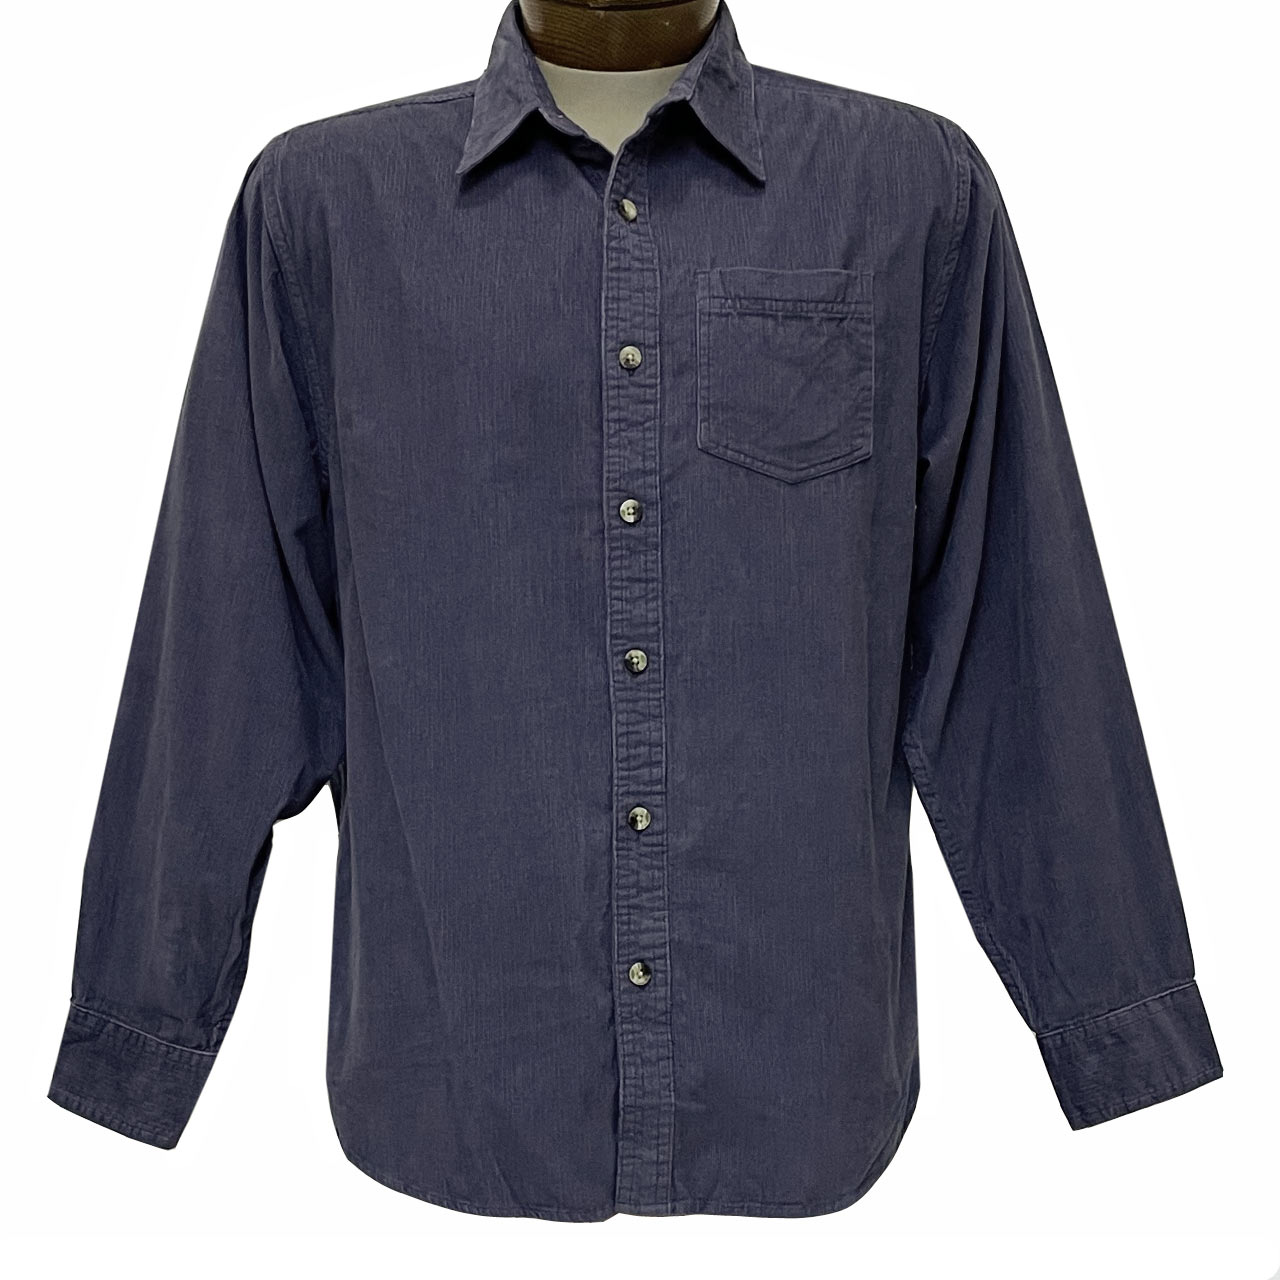 Men's Woodland Trail By Palmland Long Sleeve 100% Cotton Solid Corduroy Shirt #5900-200 Navy